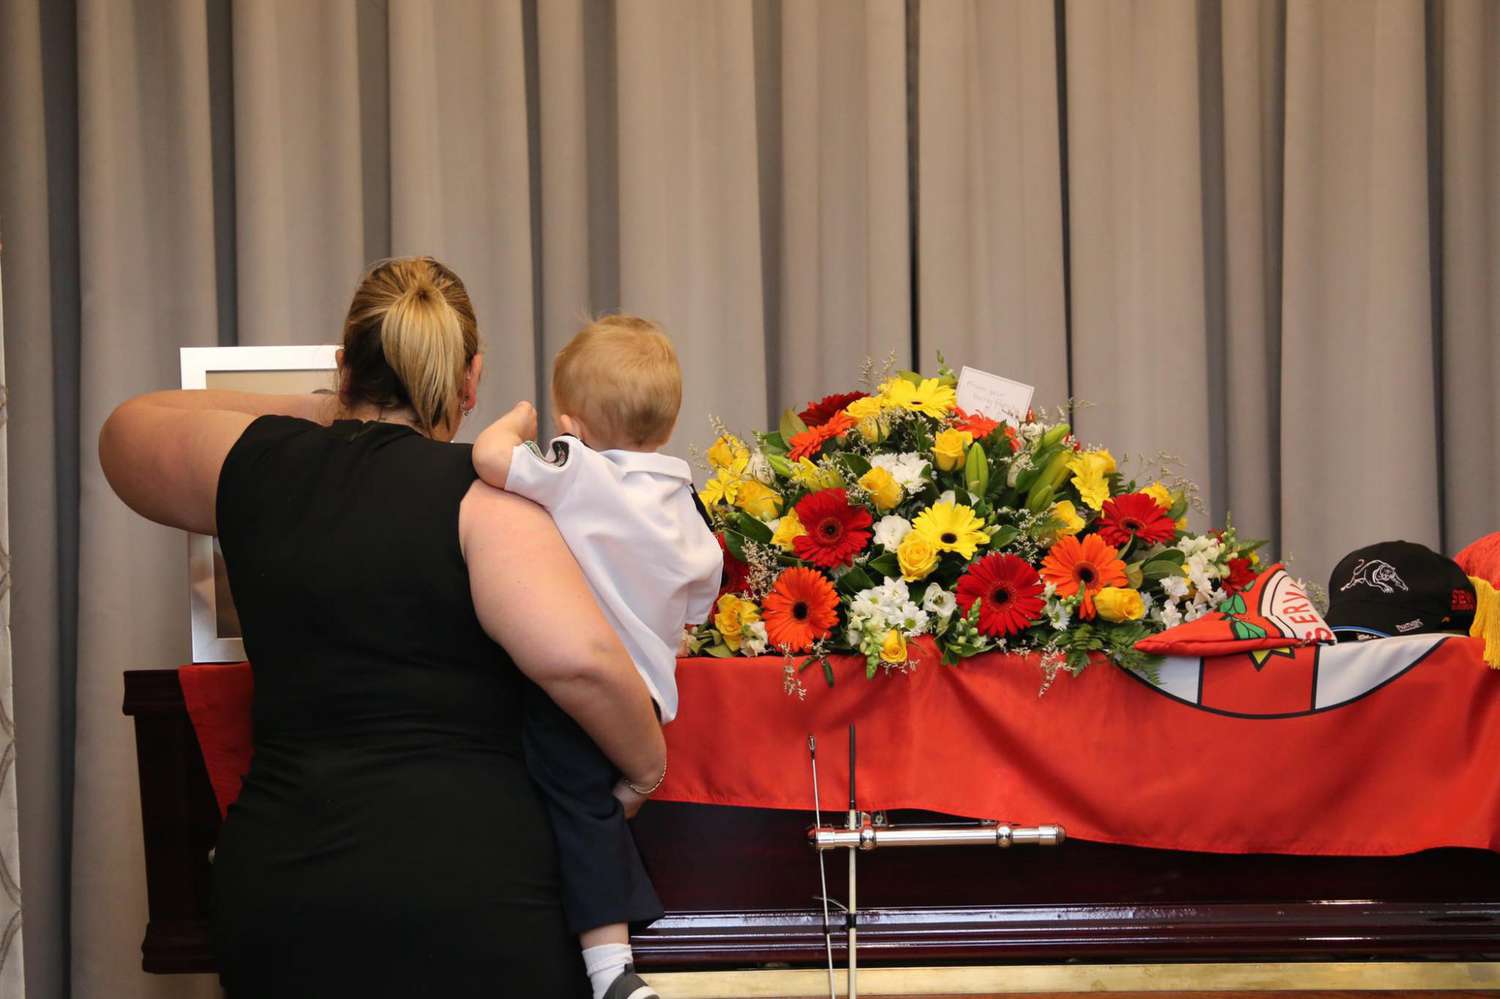 Today the NSW RFS family farewelled one of their own, with the funeral of Geoffrey Keaton held in western Sydney earlier today. Geoff was one of two firefighters who tragically lost their life while fighting fires in south west Sydney on 19 December 2019.